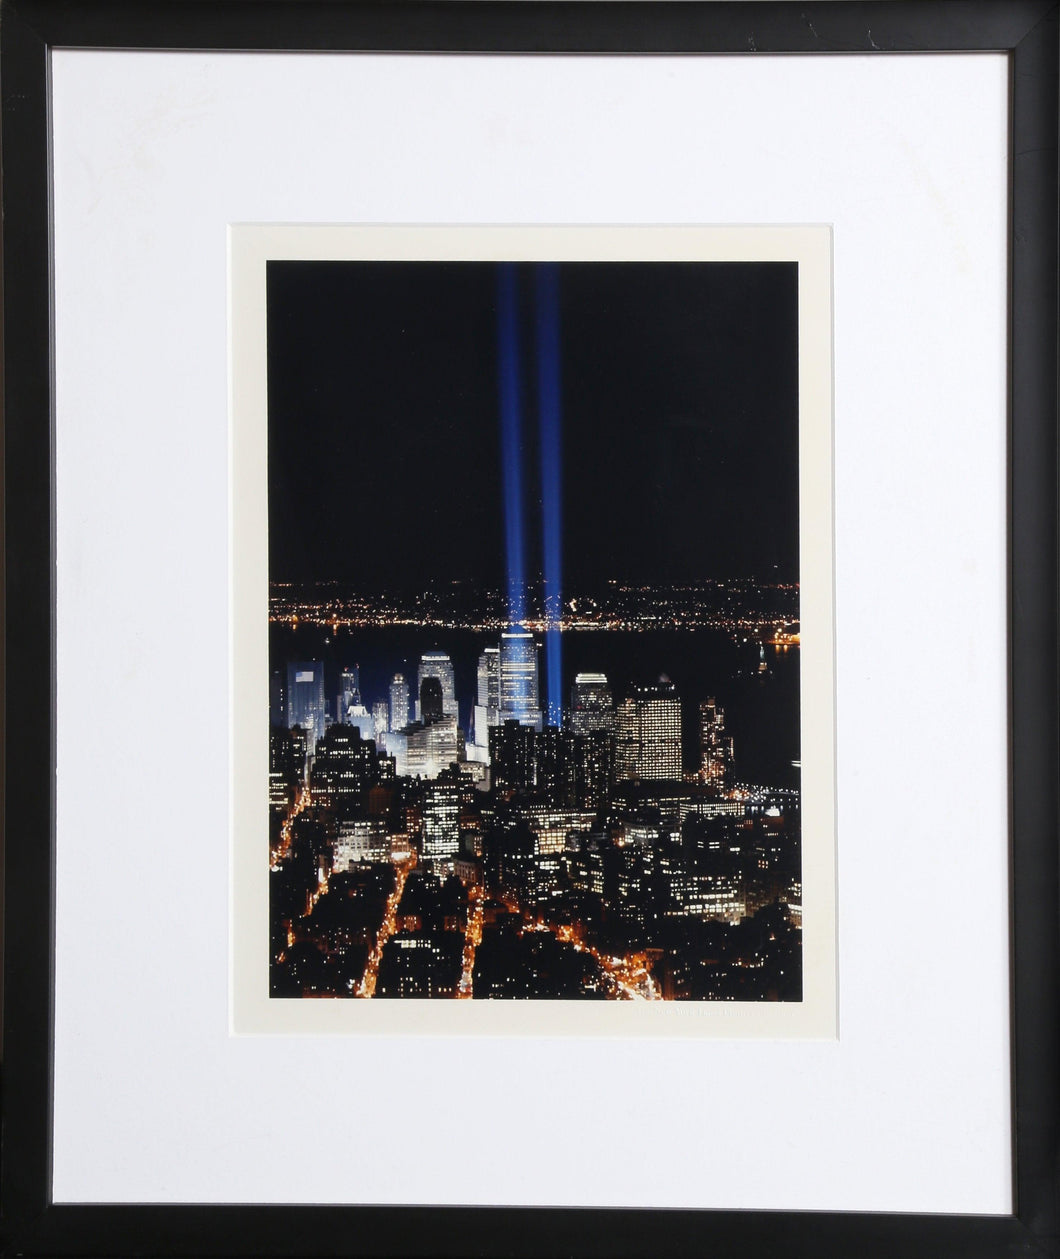 Twin Beams of Light - March 11th, 2002 Color | Vince Laforet,{{product.type}}